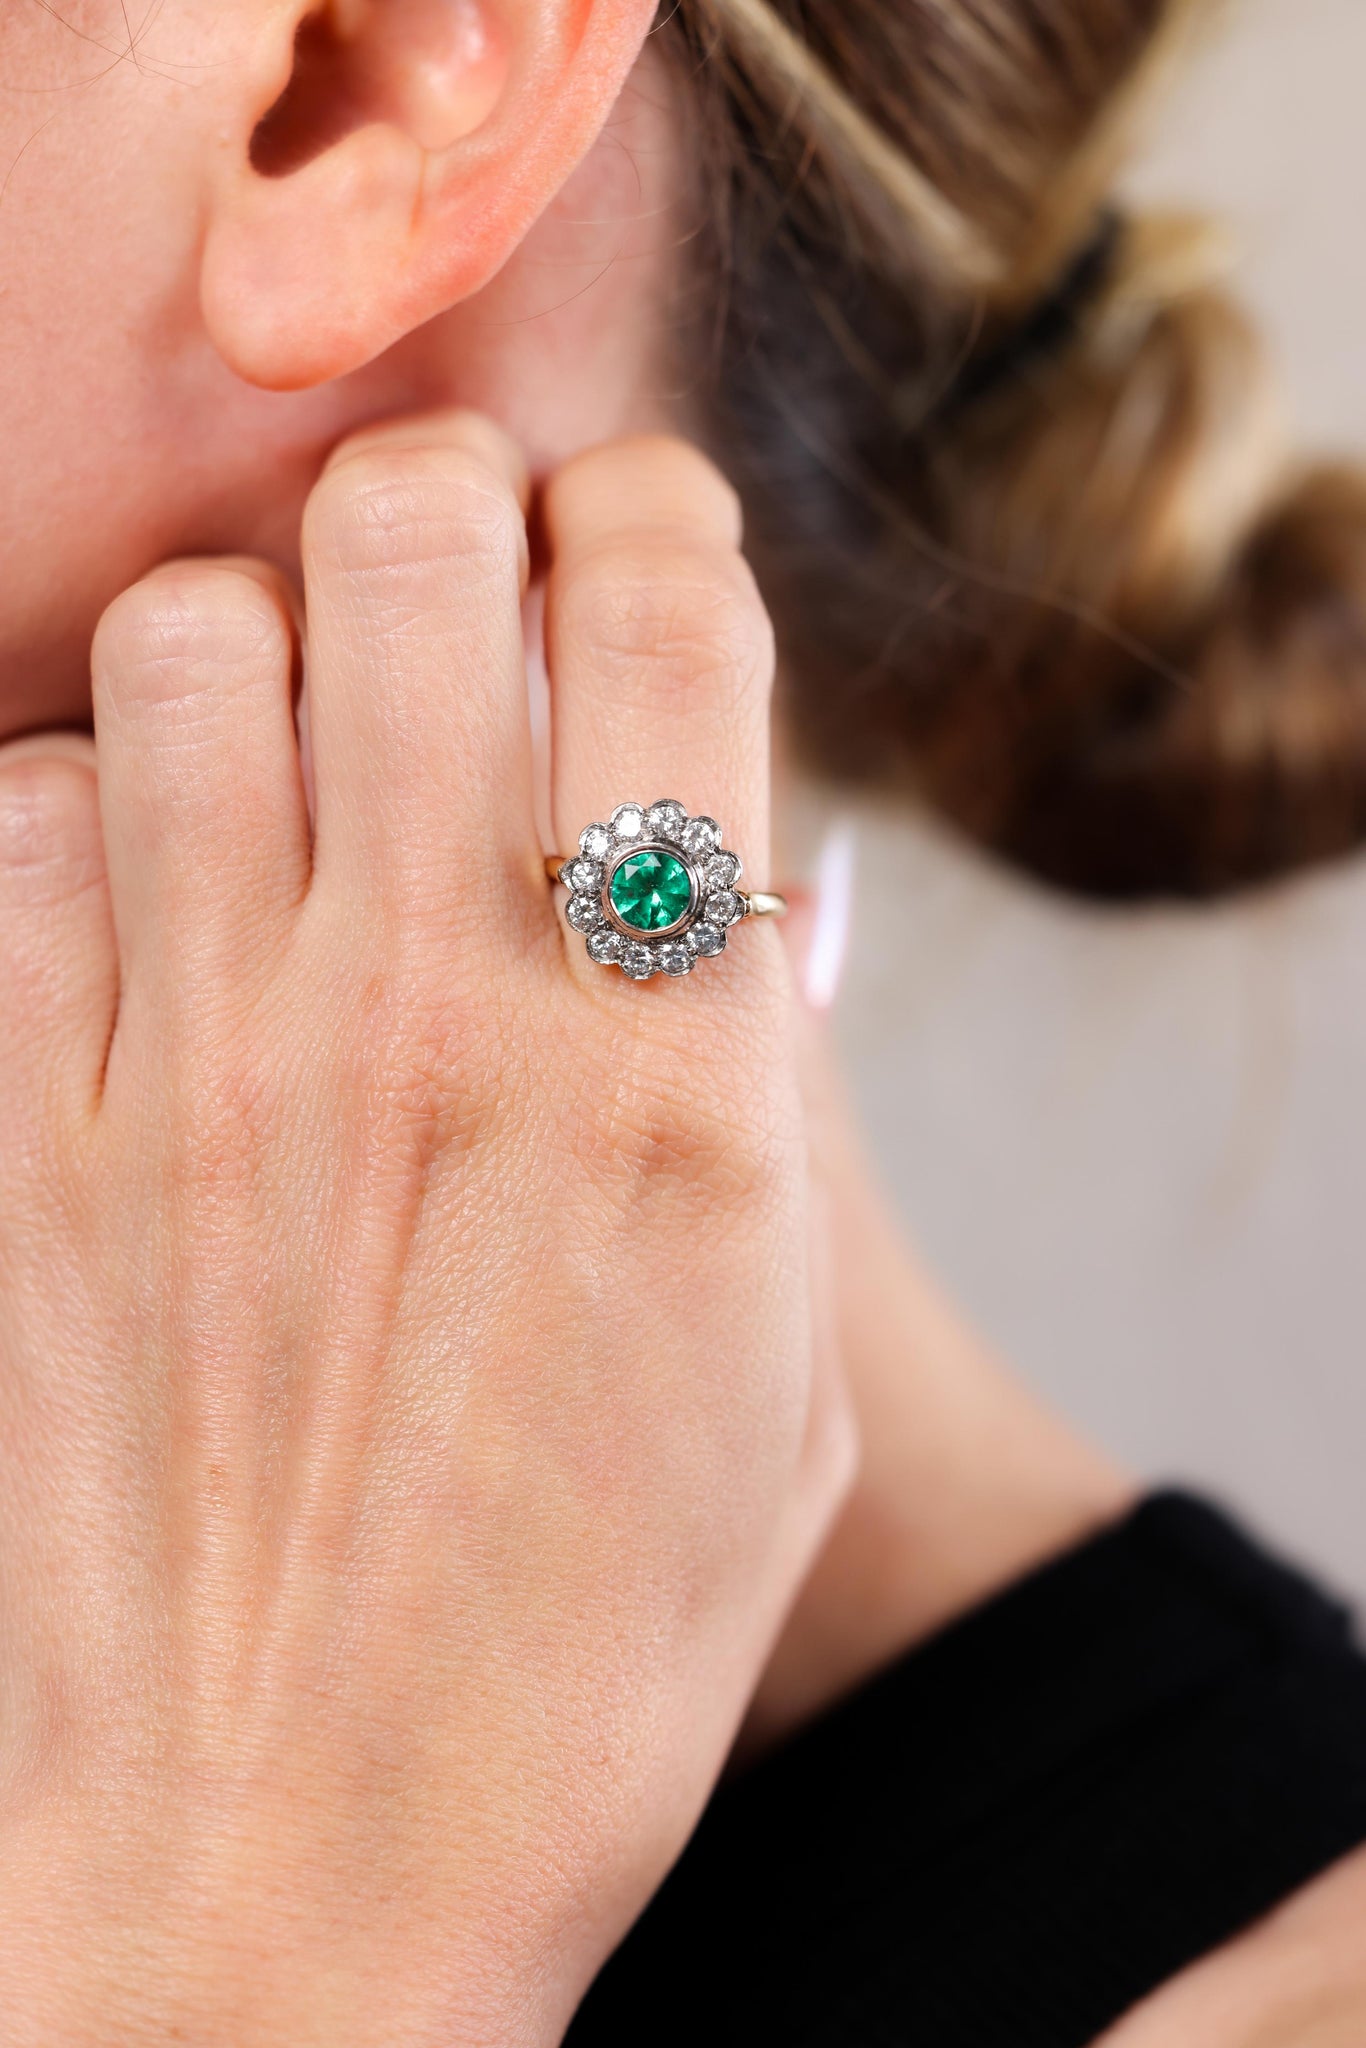 One Victorian Revival Emerald Diamond 14k Yellow Gold Platinum Cluster Ring.